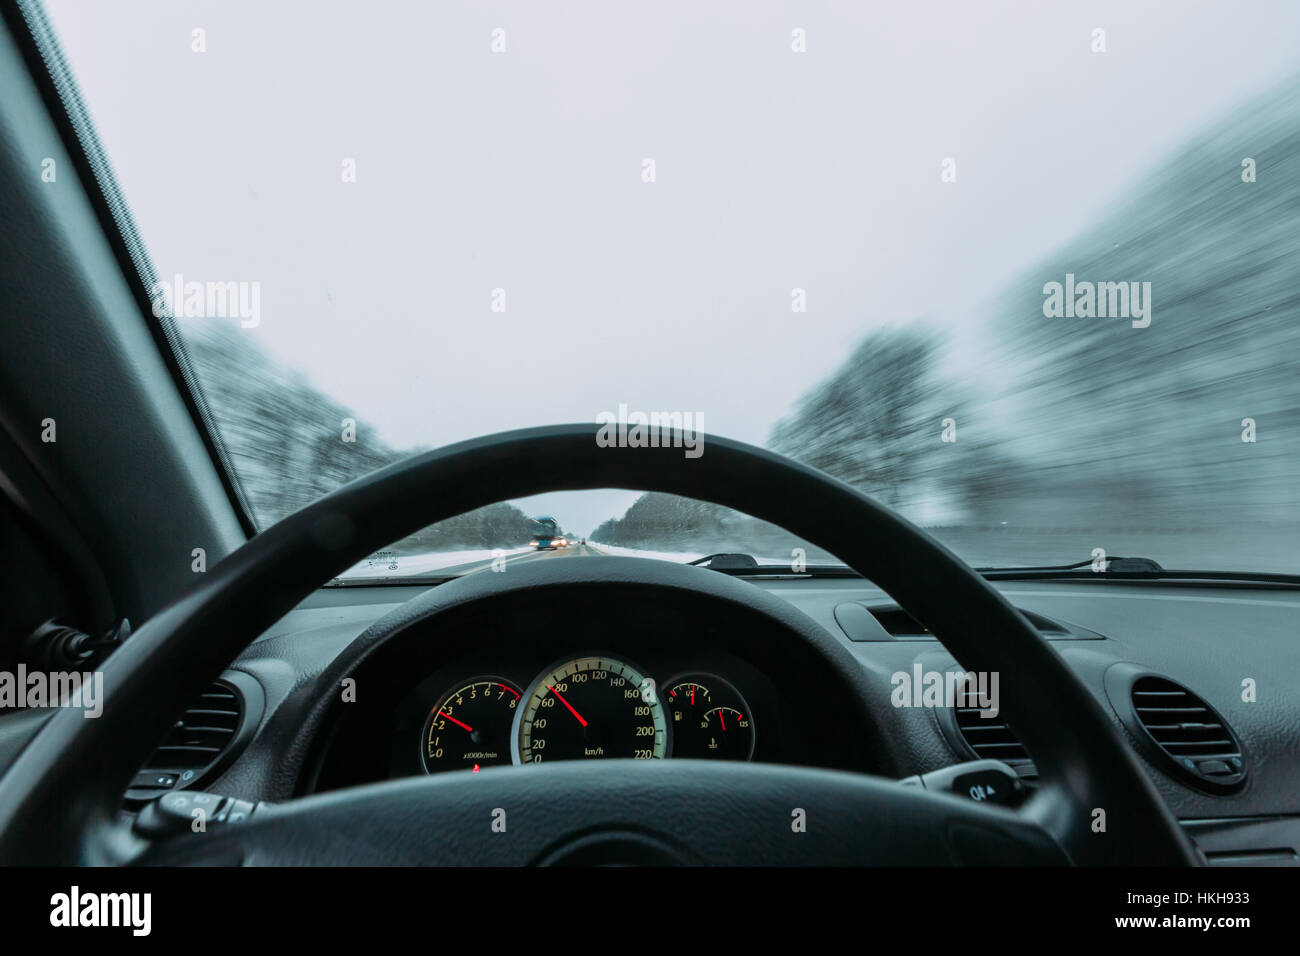 Riding behind the wheel of a car in winter Stock Photo